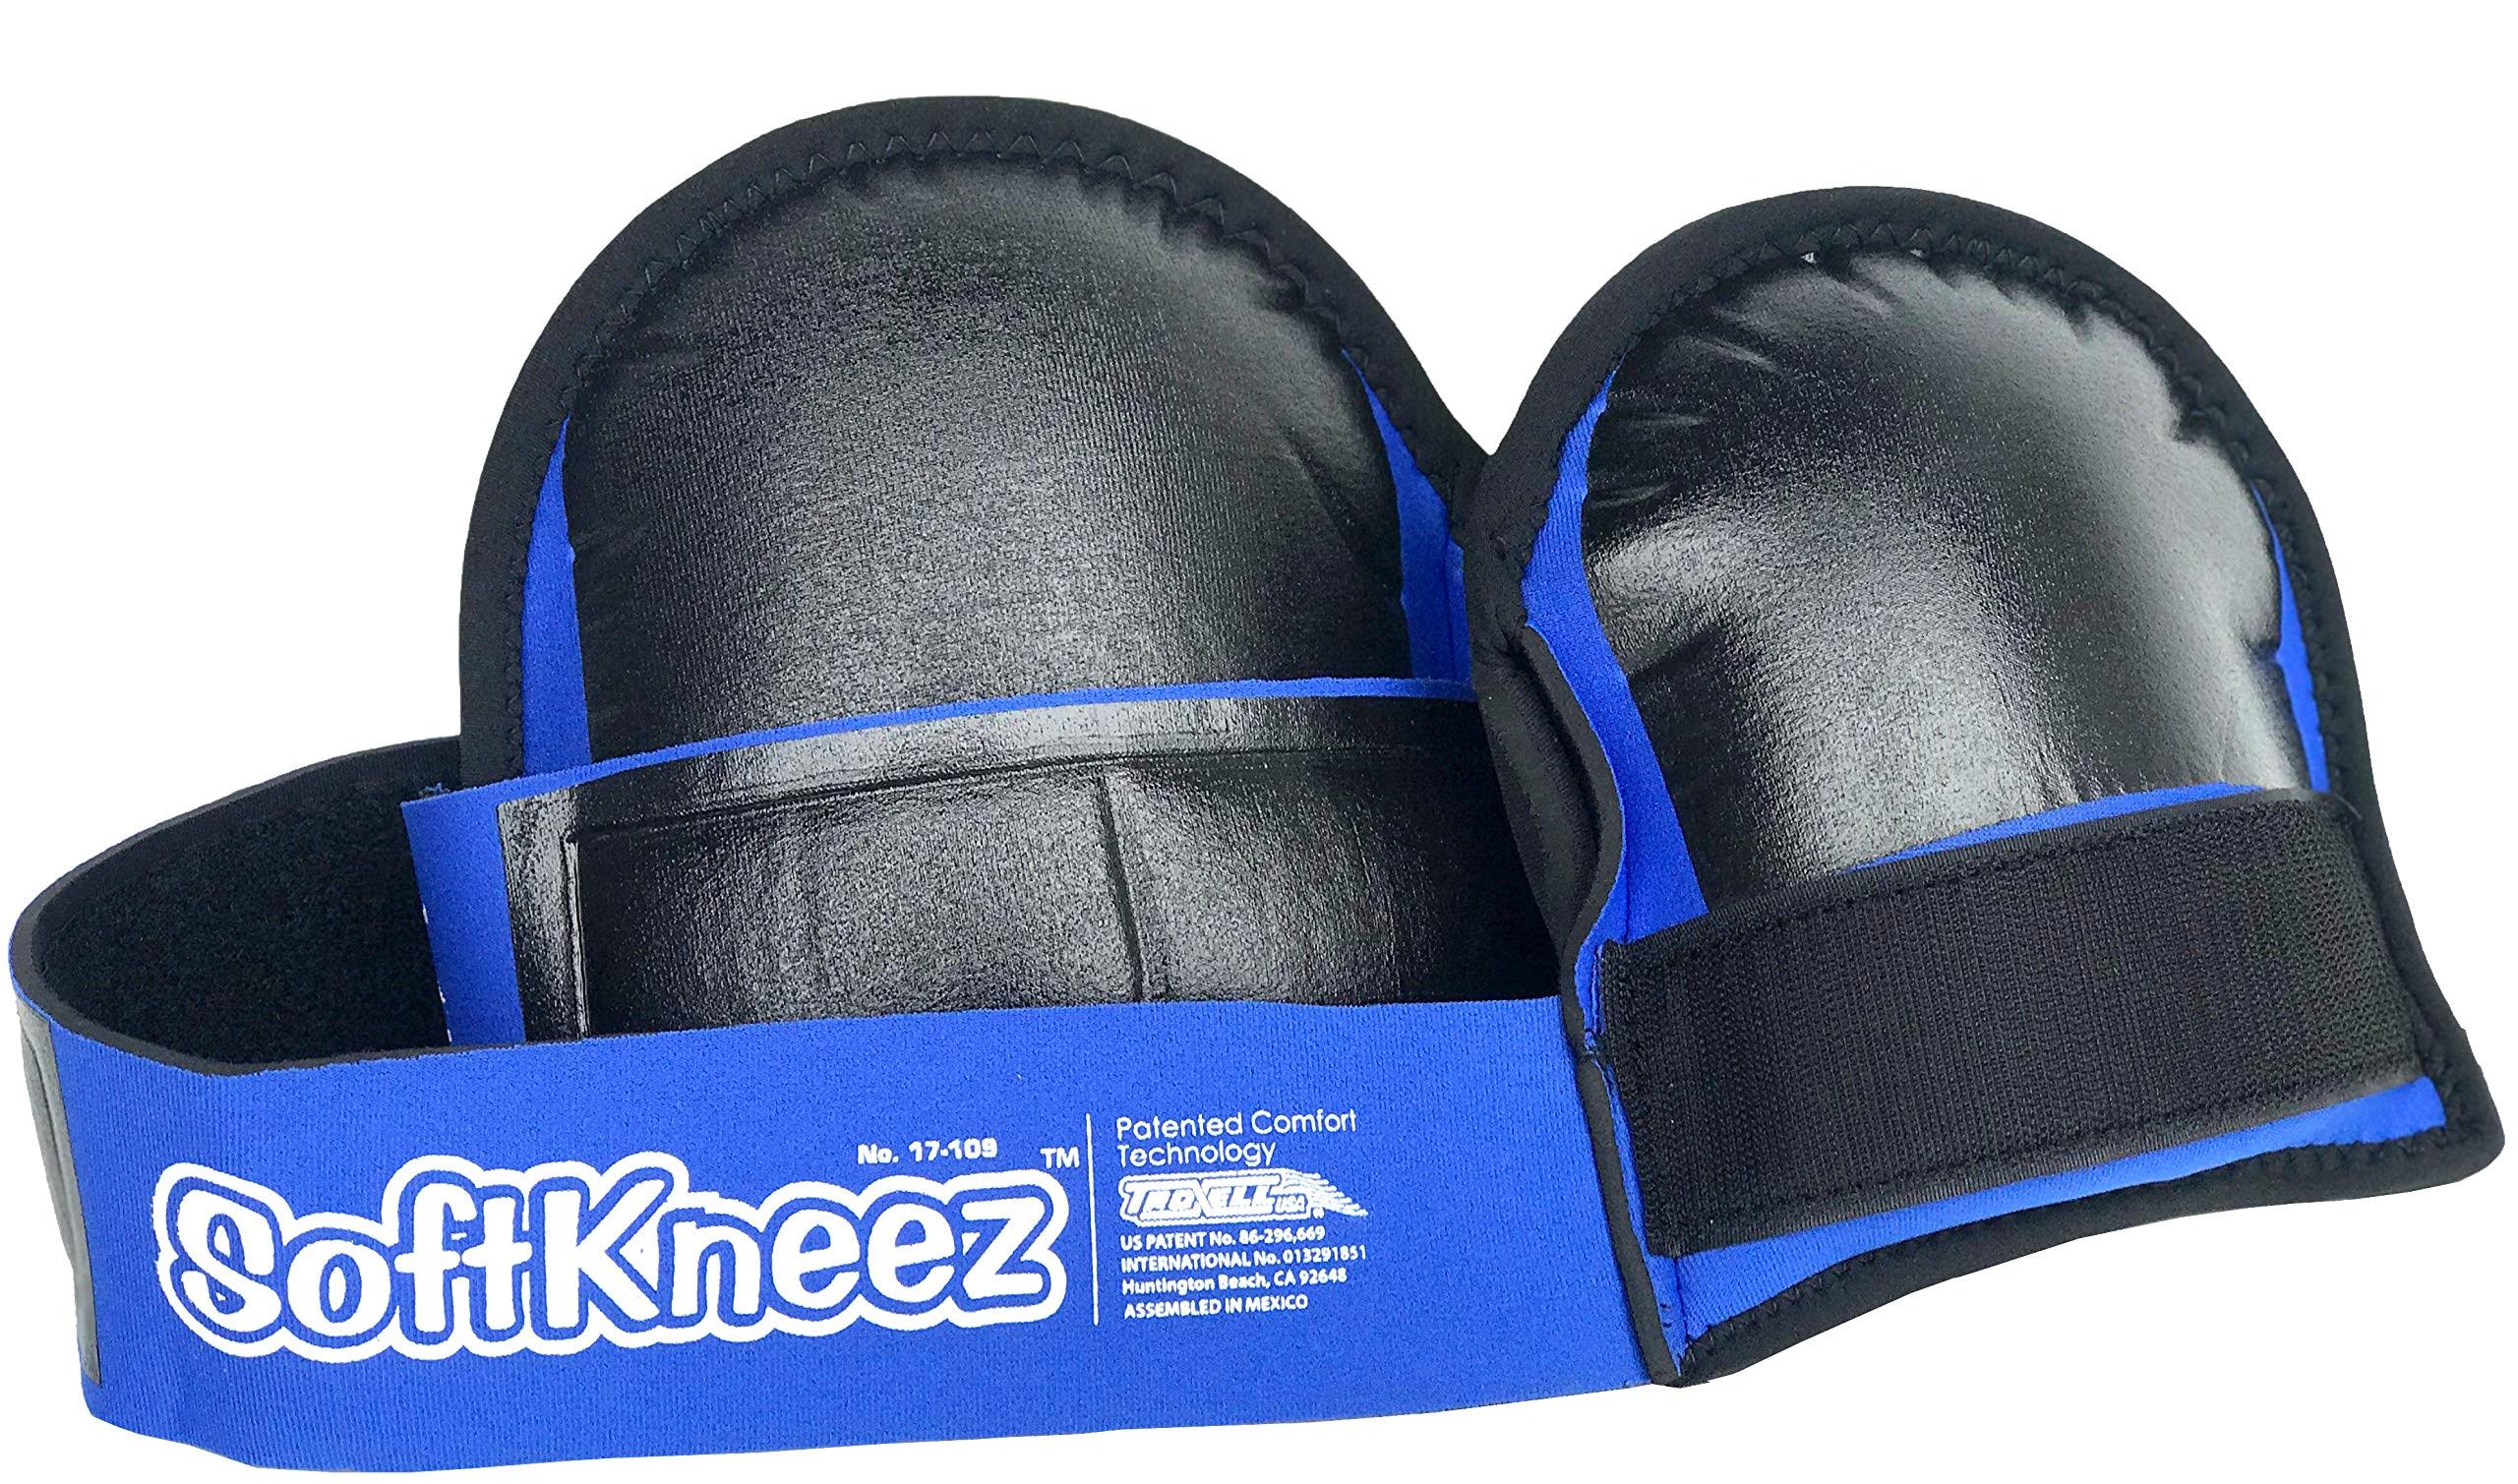 Troxell USA - Supersoft Kneez Knee Pad (Bagged in Pairs)